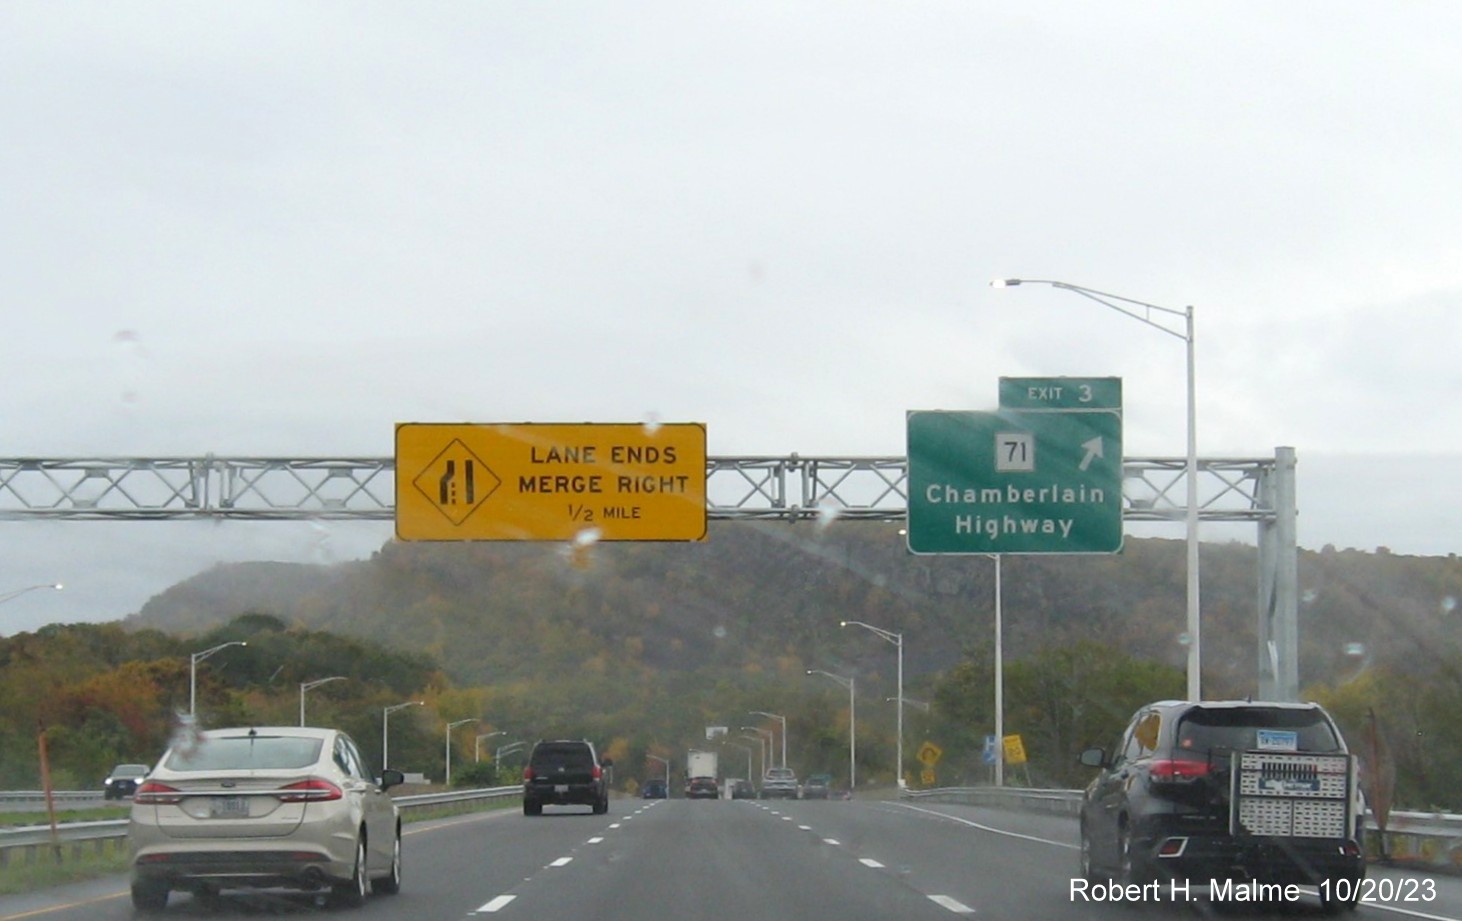 Image of new overhead ramp sign for the CT 71 exit with new milepost based exit number 
         on I-691 West in Meriden, October 2023